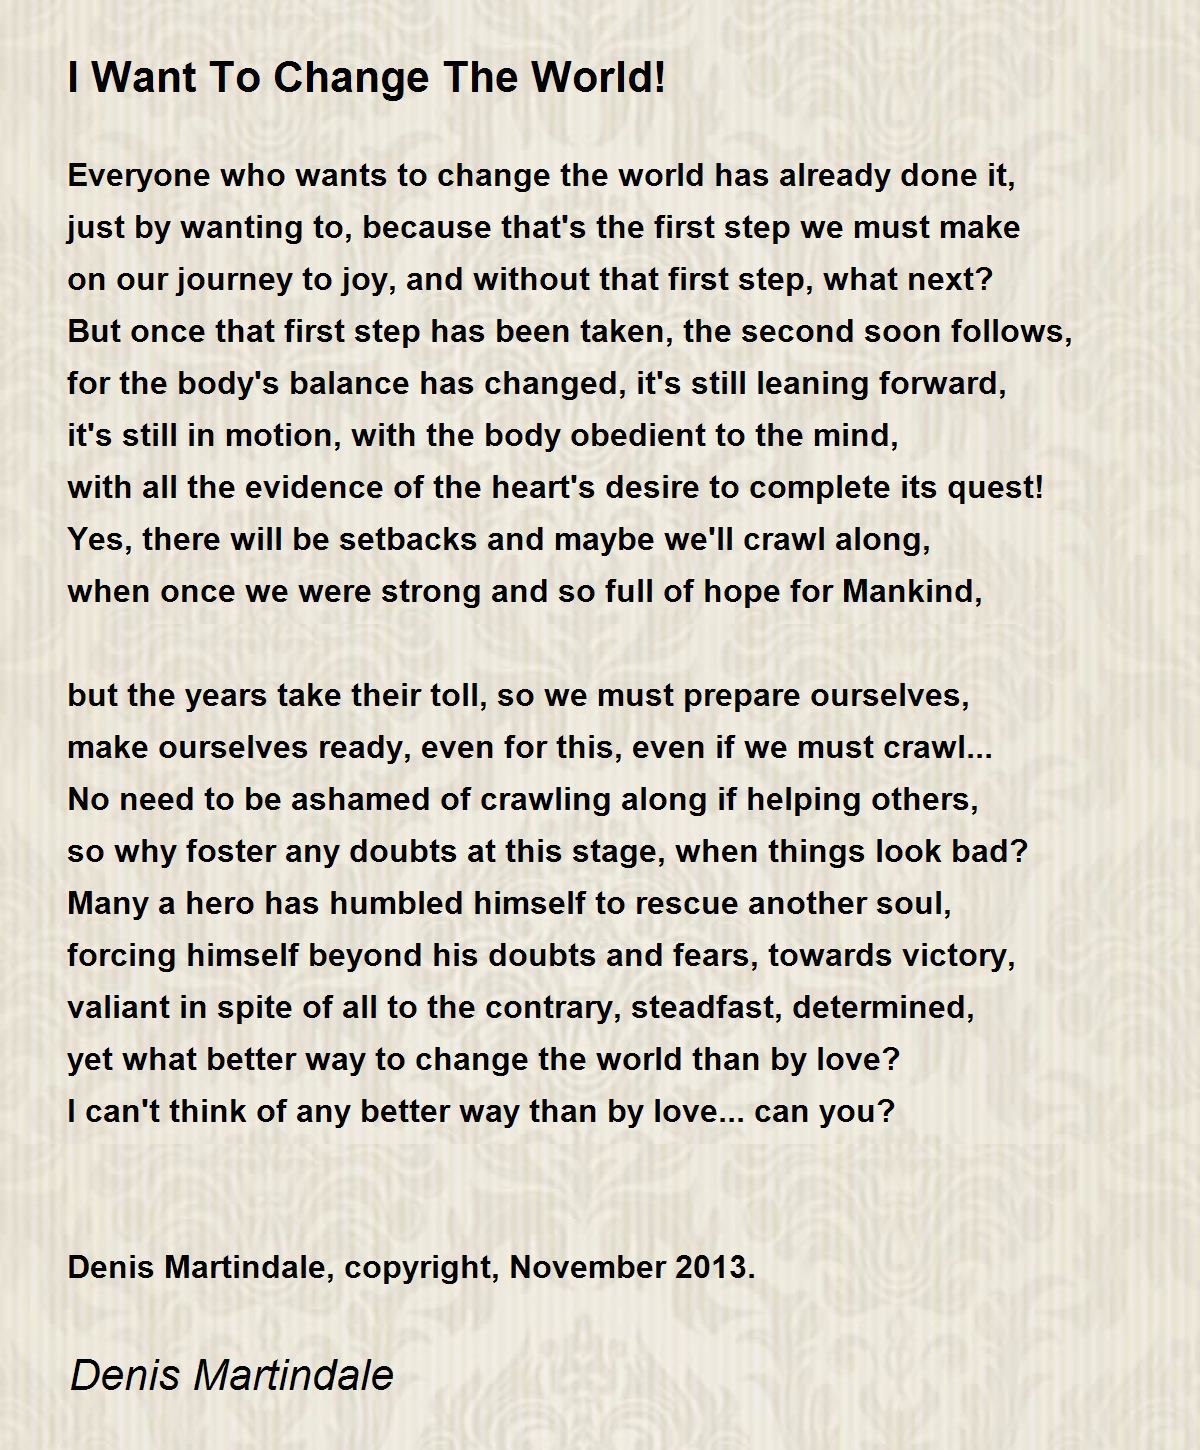 I Want To Change The World! Poem by Denis Martindale